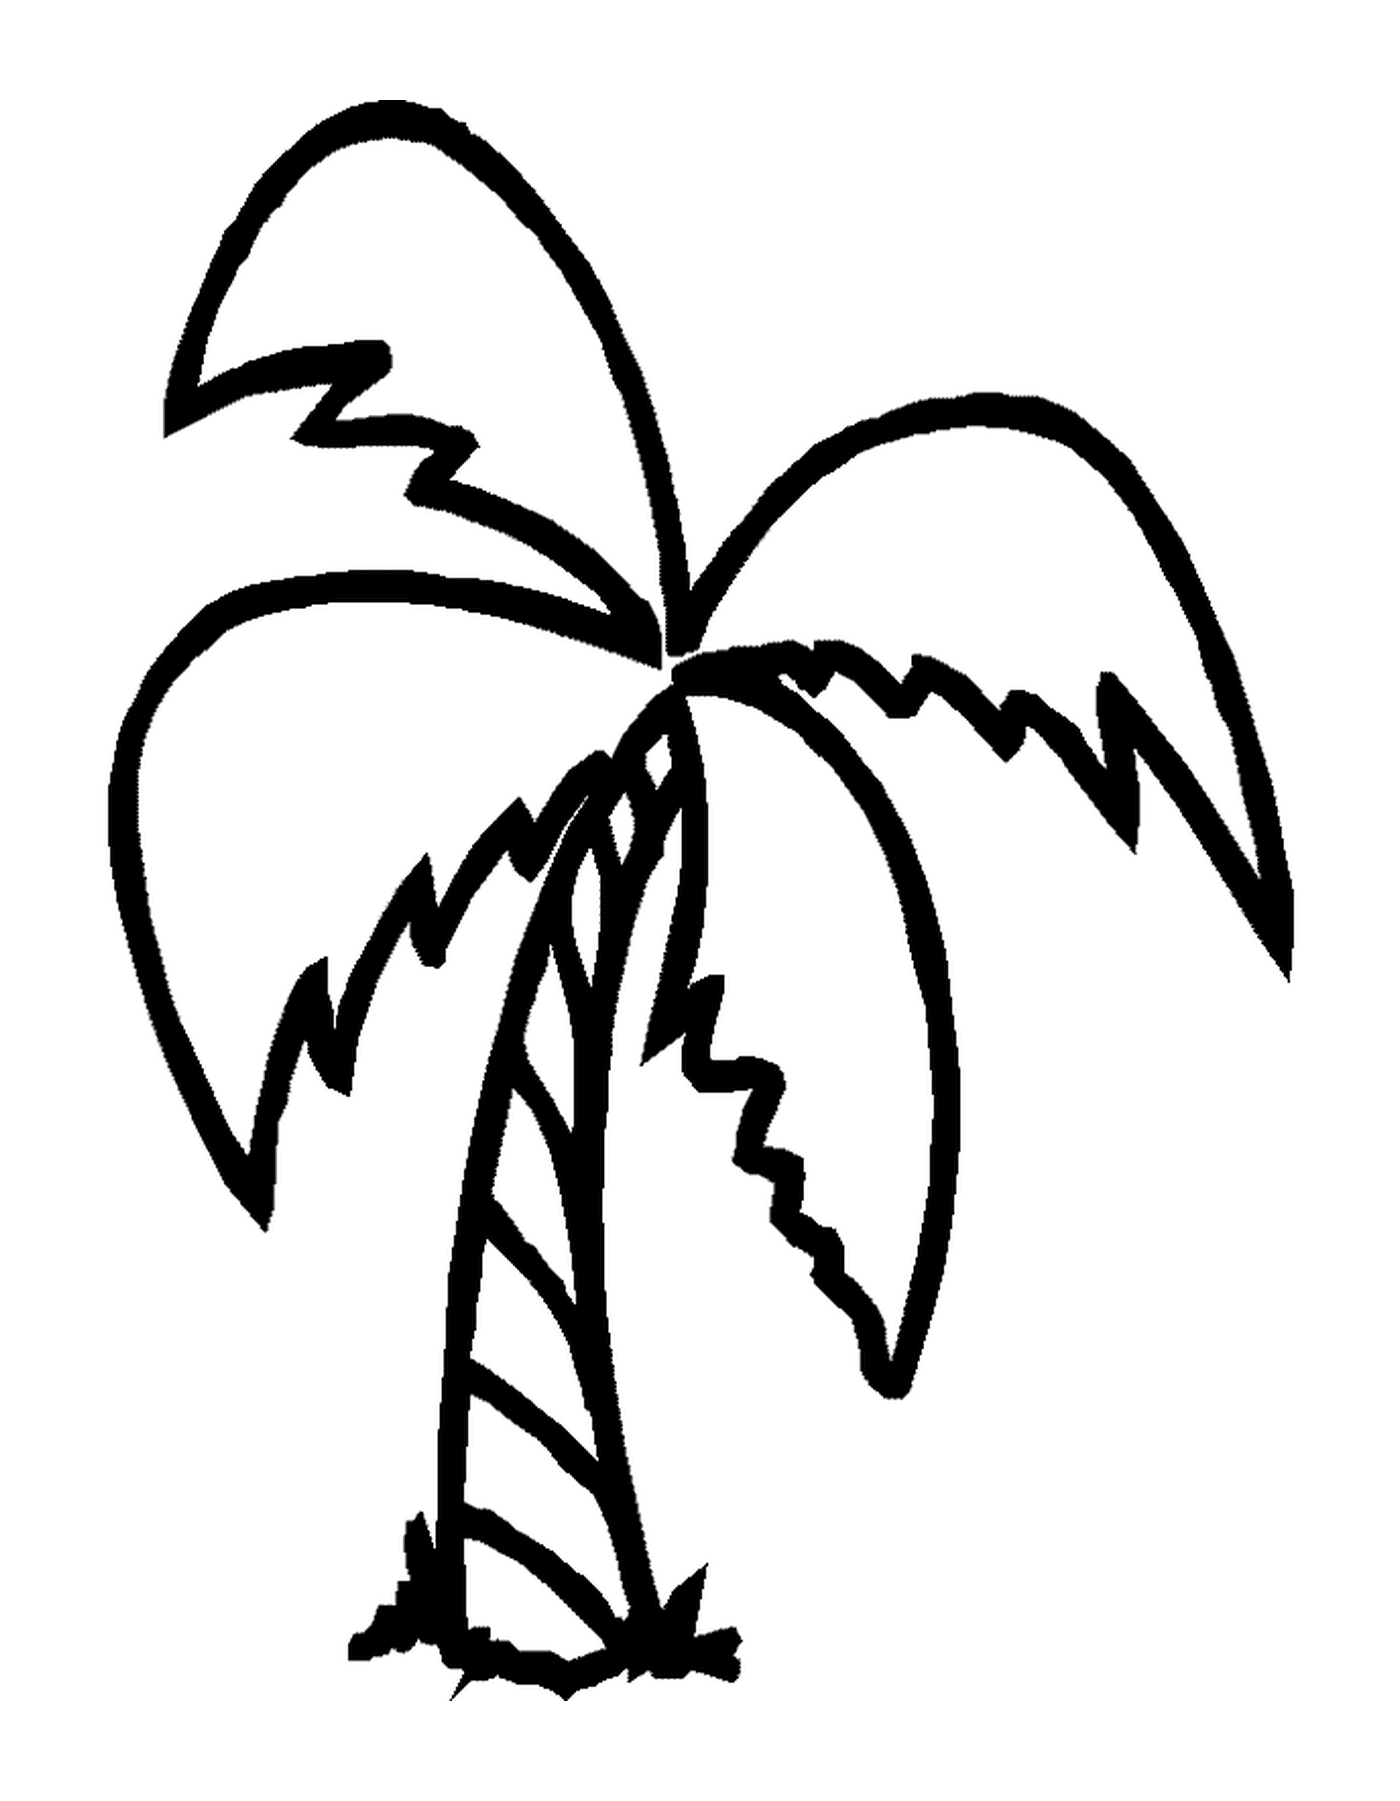  A palm tree with 4 branches 